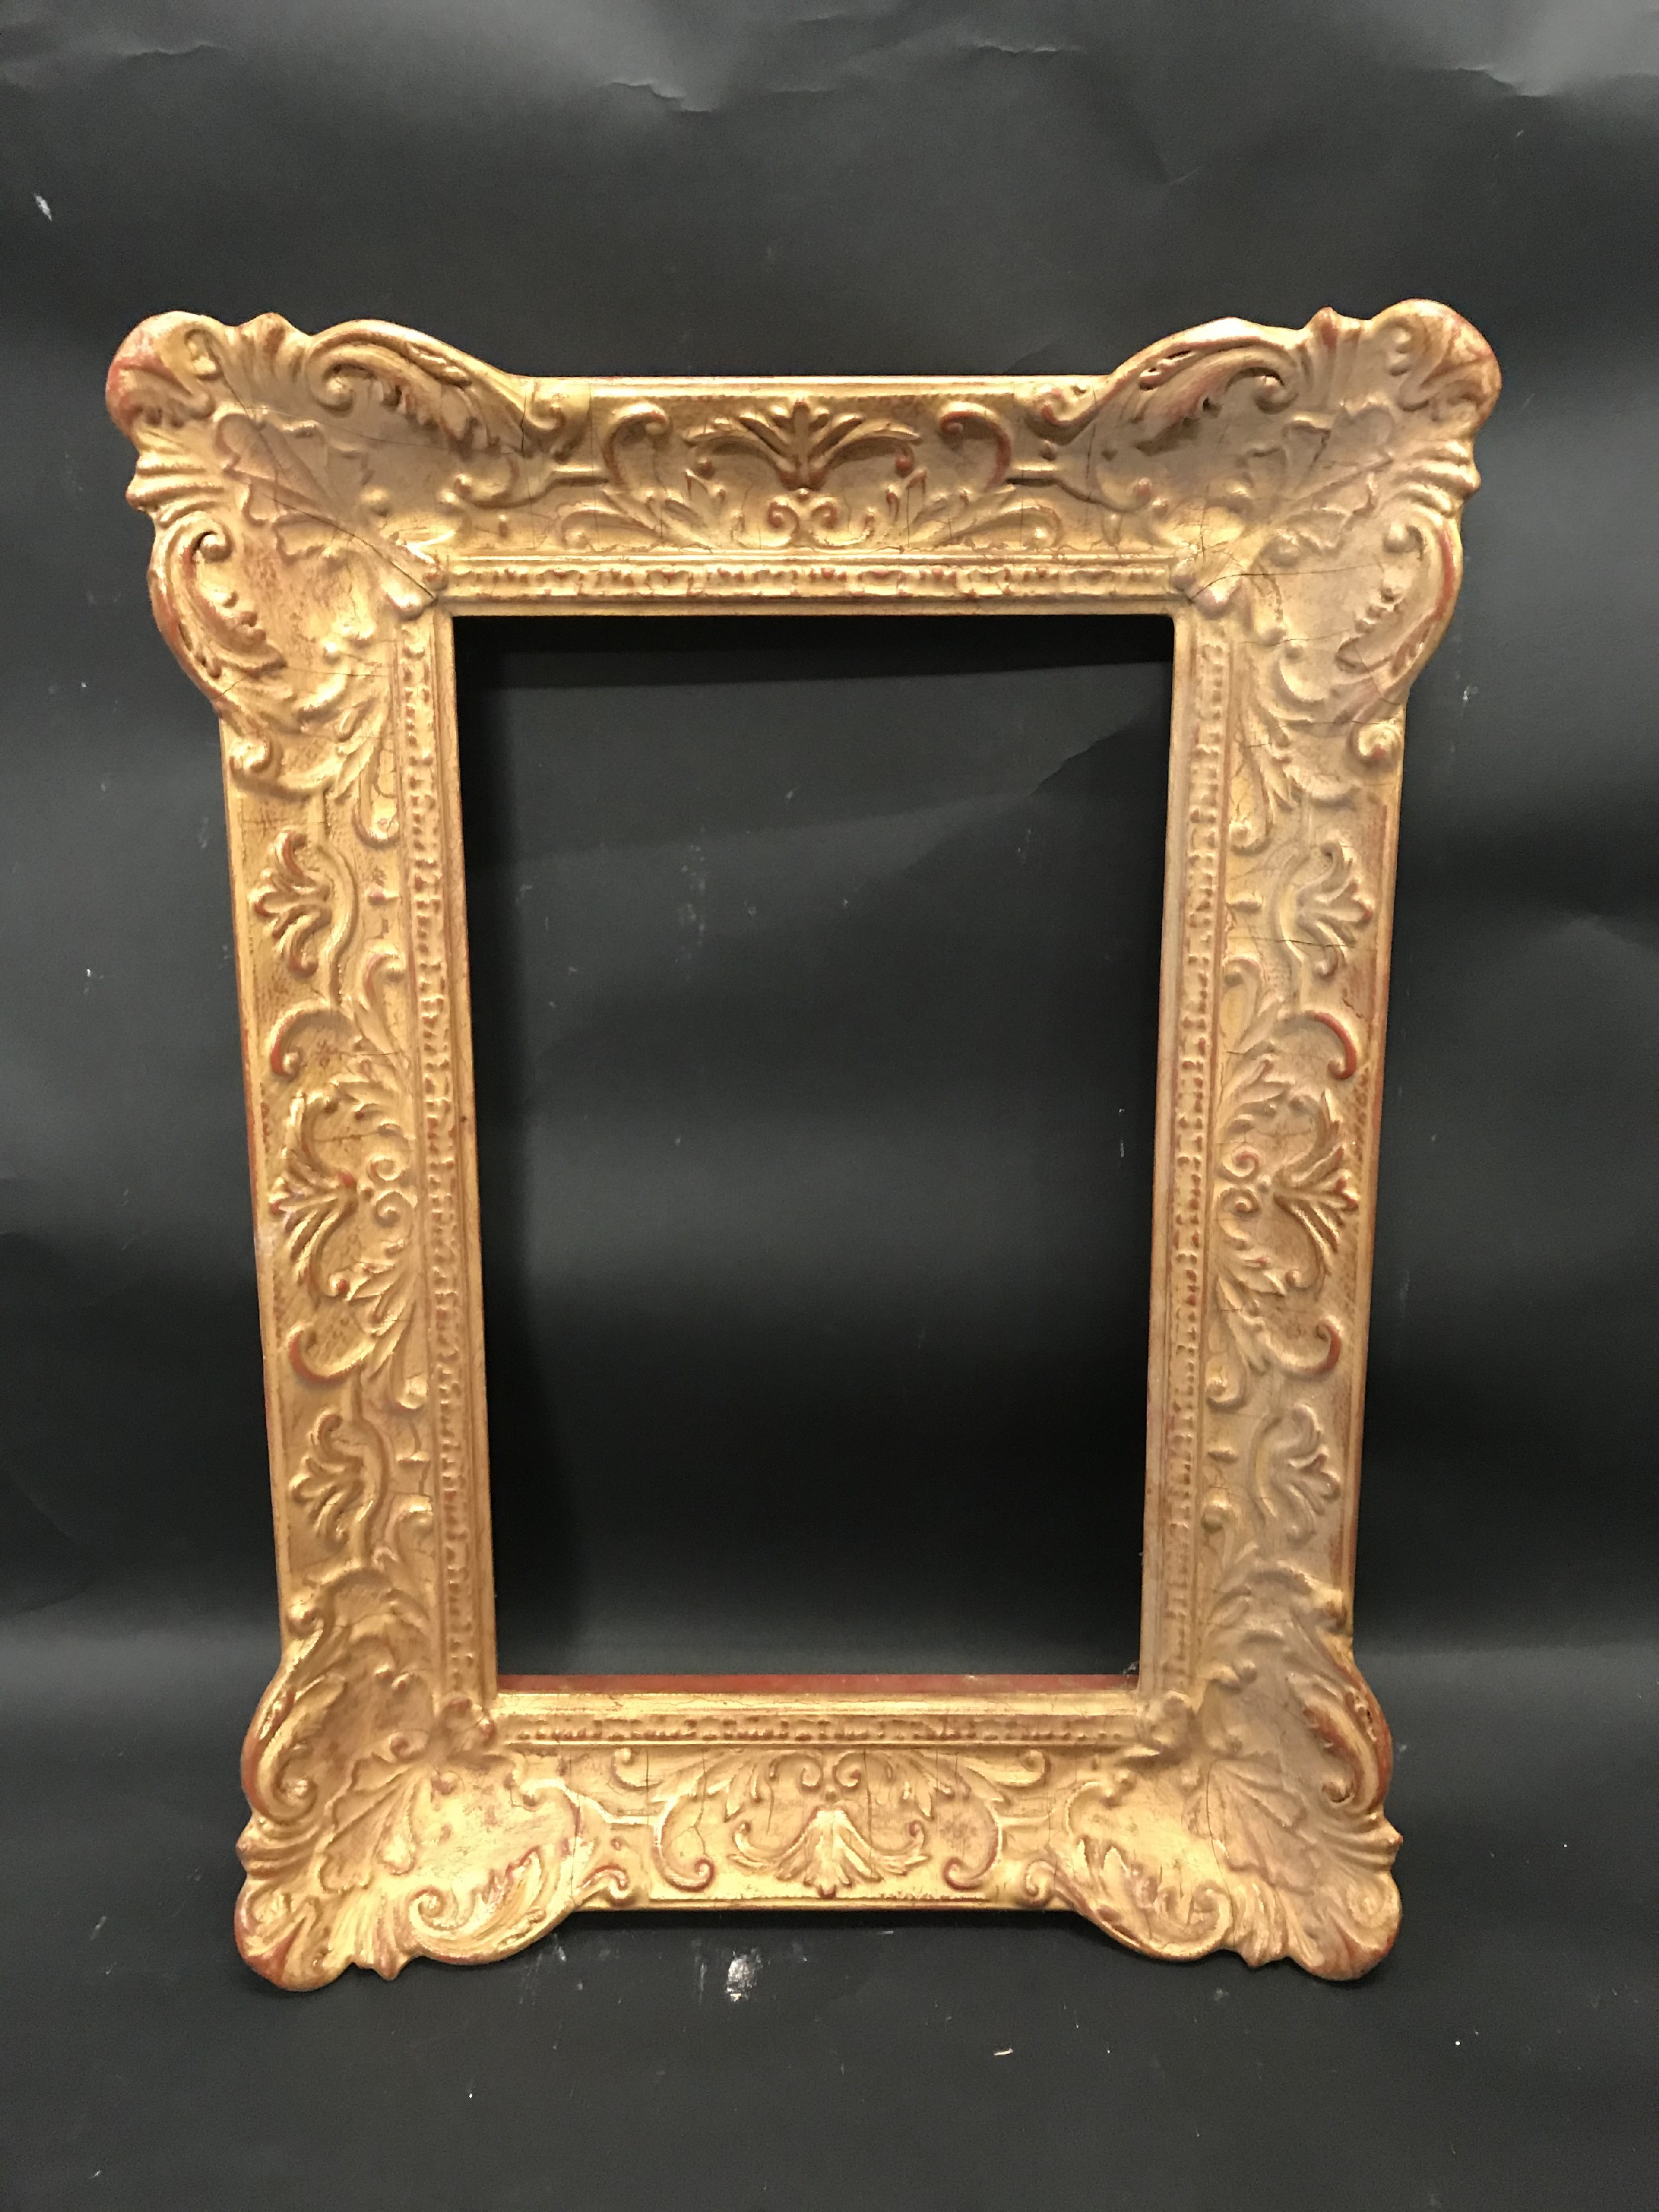 20th Century English School. A Gilt Composition Frame, with swept centres, 15.75" x 10" (rebate). - Image 2 of 3